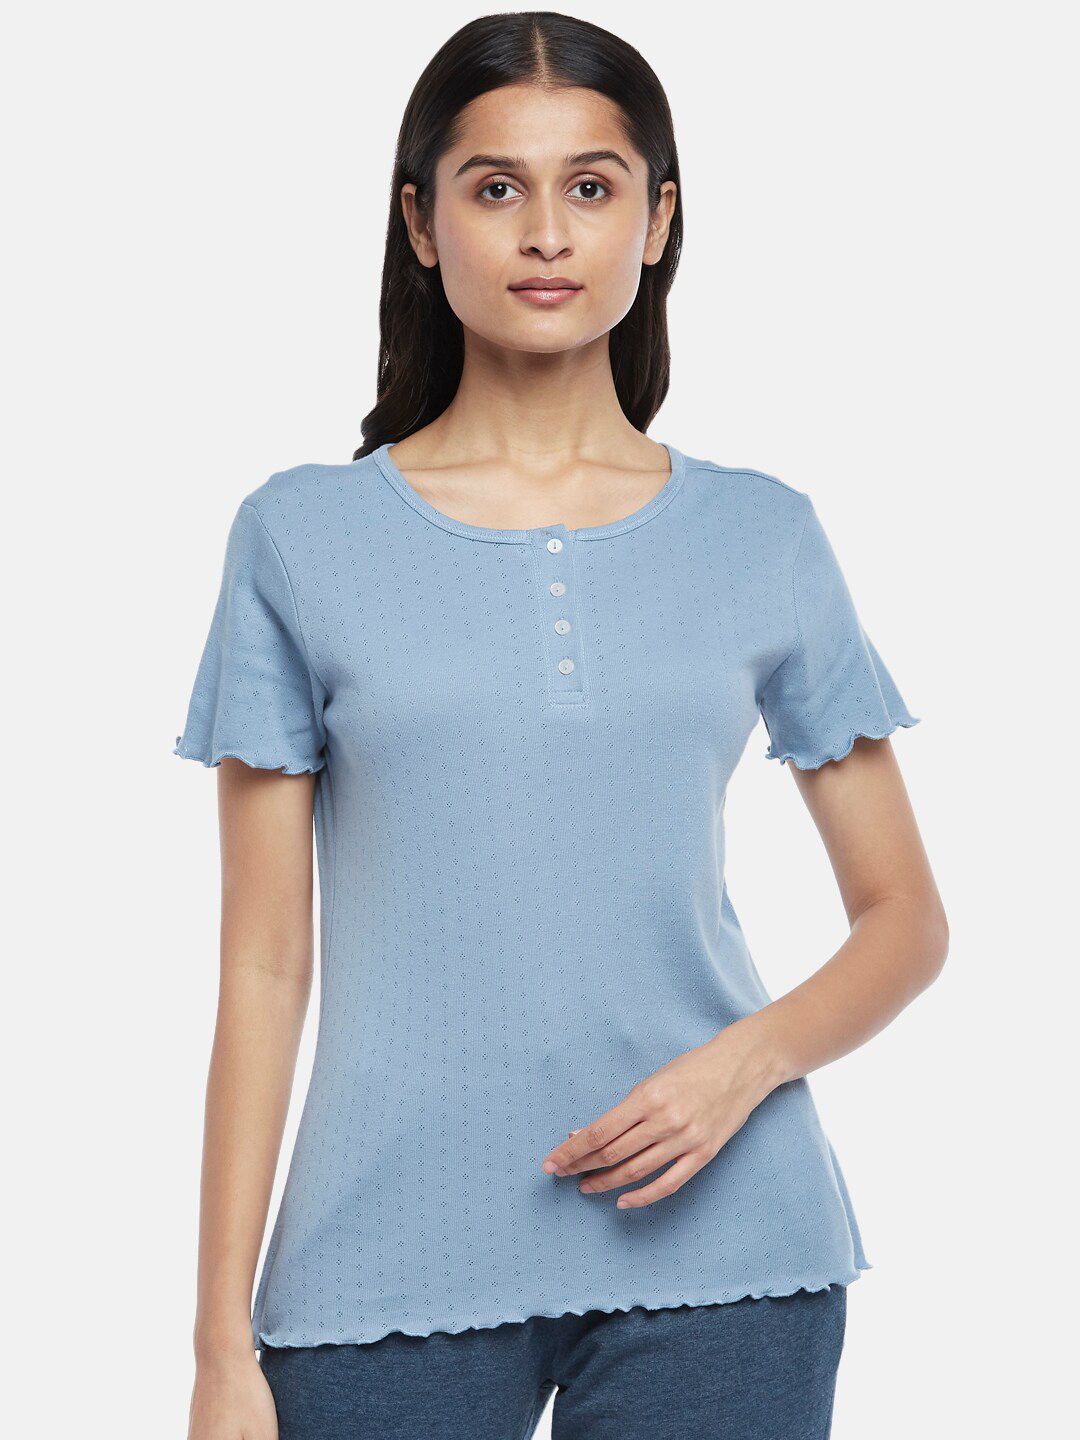 Dreamz by Pantaloons Blue Cotton Lounge tshirt Price in India